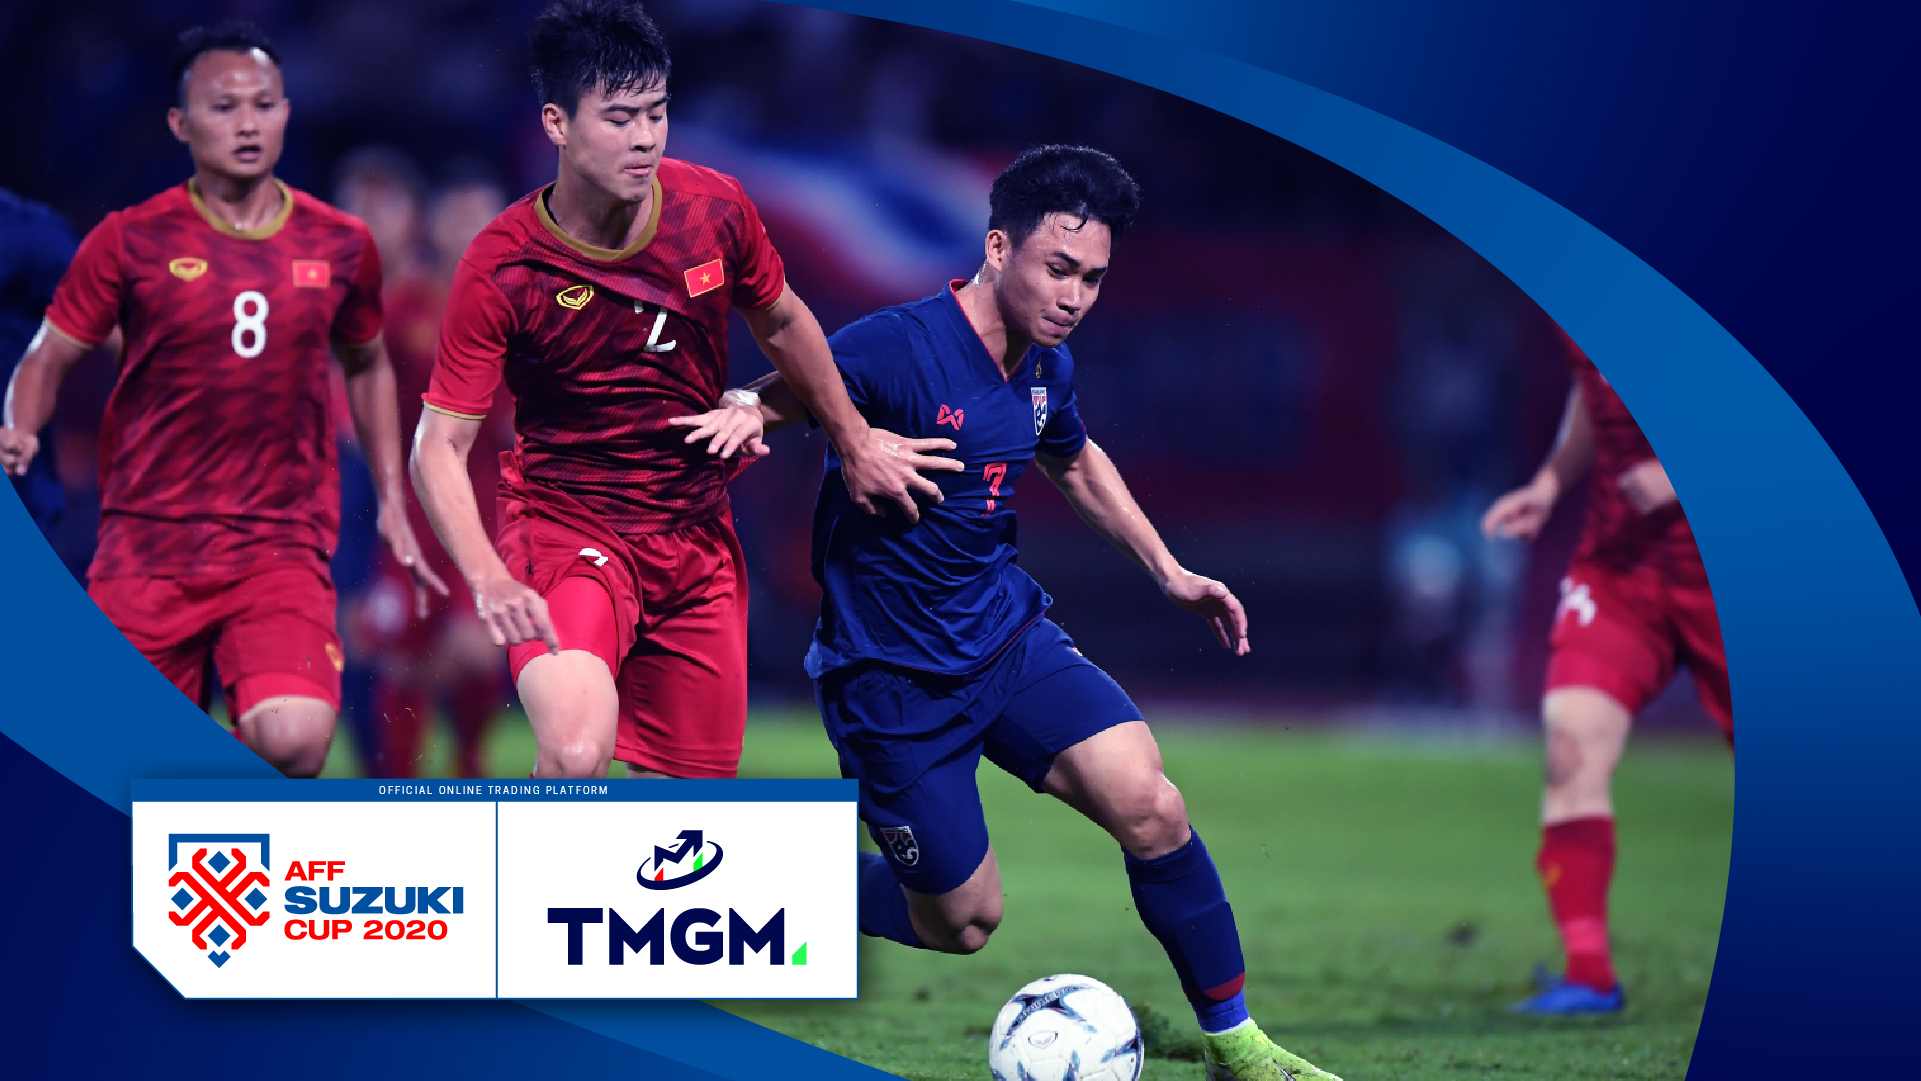 TMGM Becomes The Official Online Trading Platform Of The AFF Suzuki Cup 2020